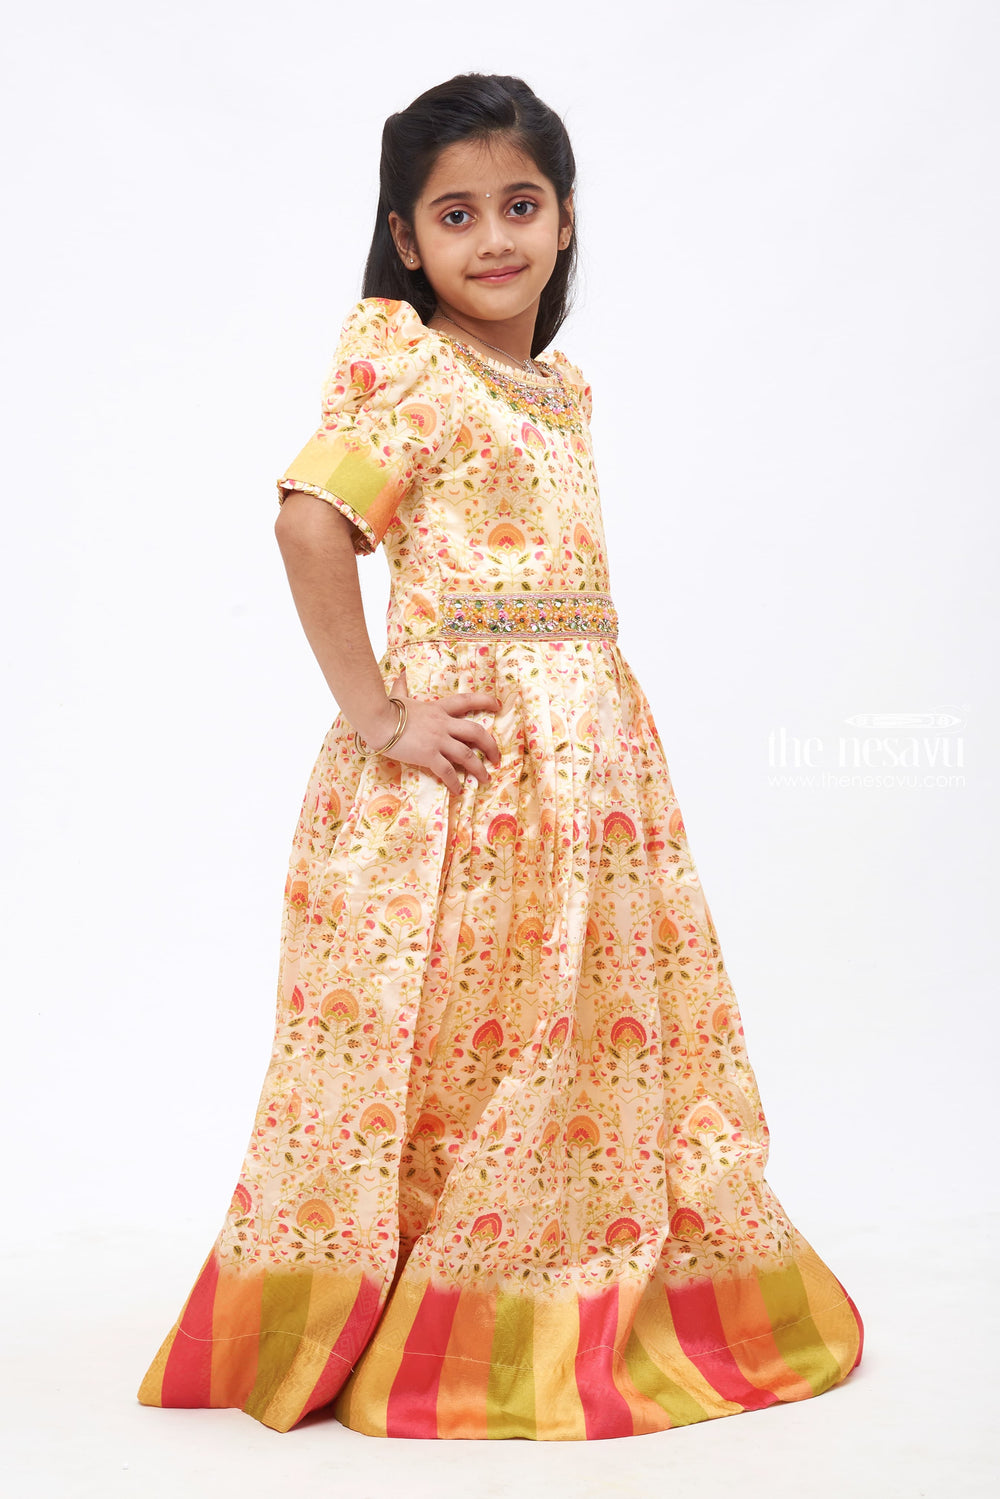 The Nesavu Girls Party Gown Golden Radiance: Girls Mirror Embroidered Yellow Party Gown Nesavu Classic Meets Contemporary | Anarkali Dresses for Little Girls | The Nesavu